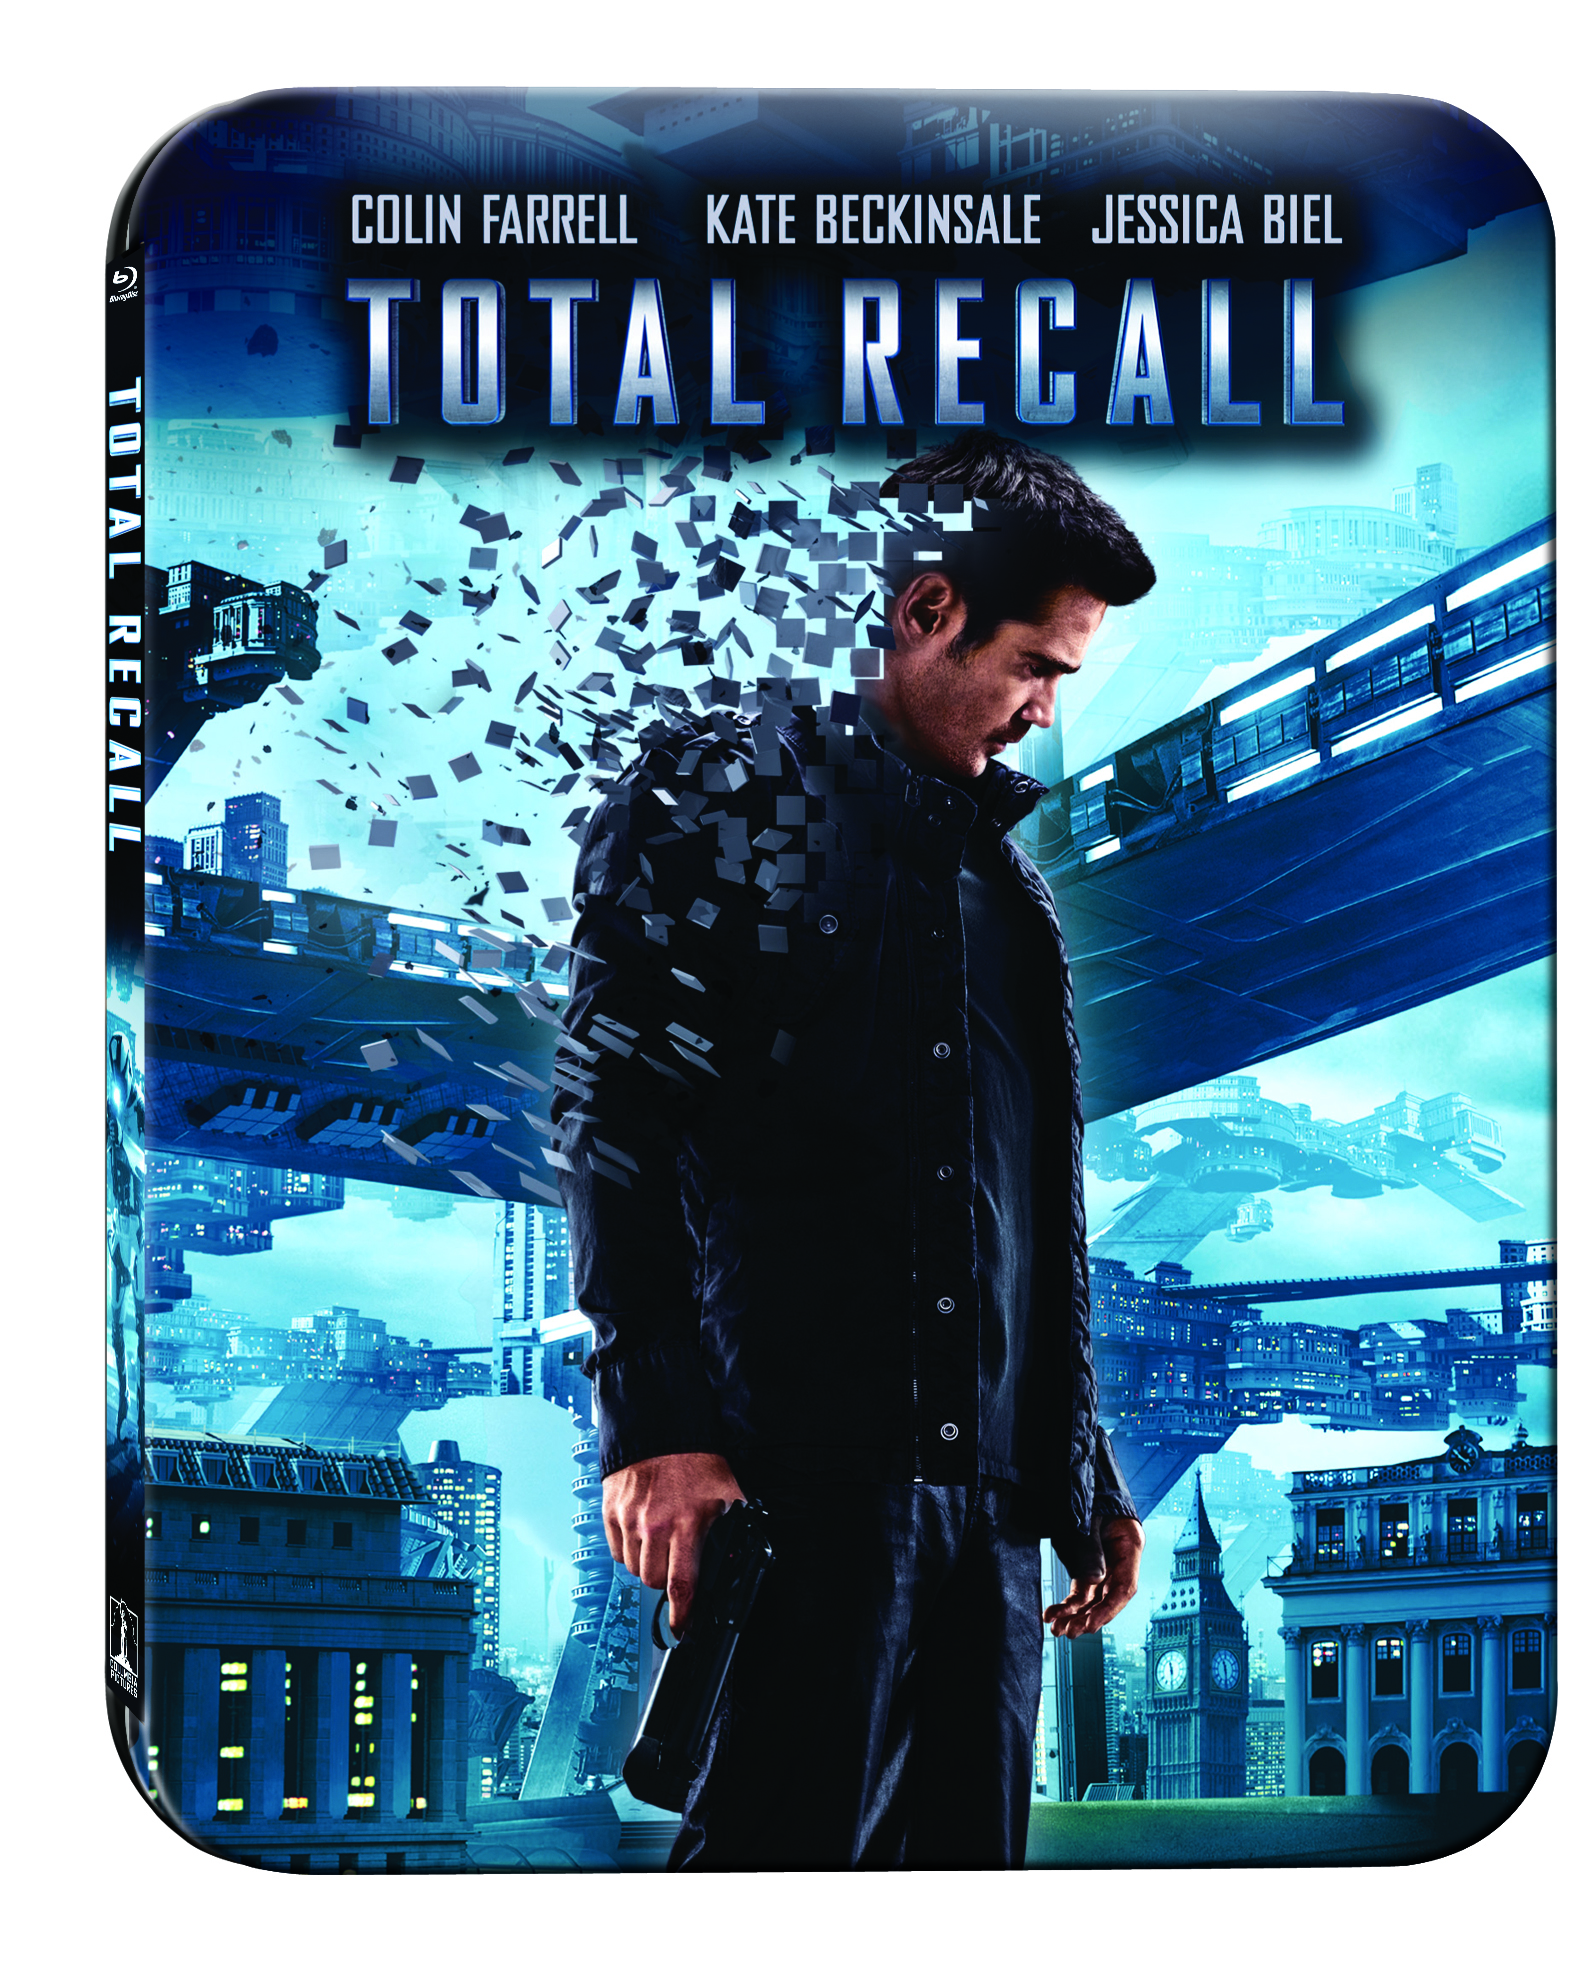 BSB Exclusive: Total Recall Future Shop Exclusive Steelbook is being released in Canada